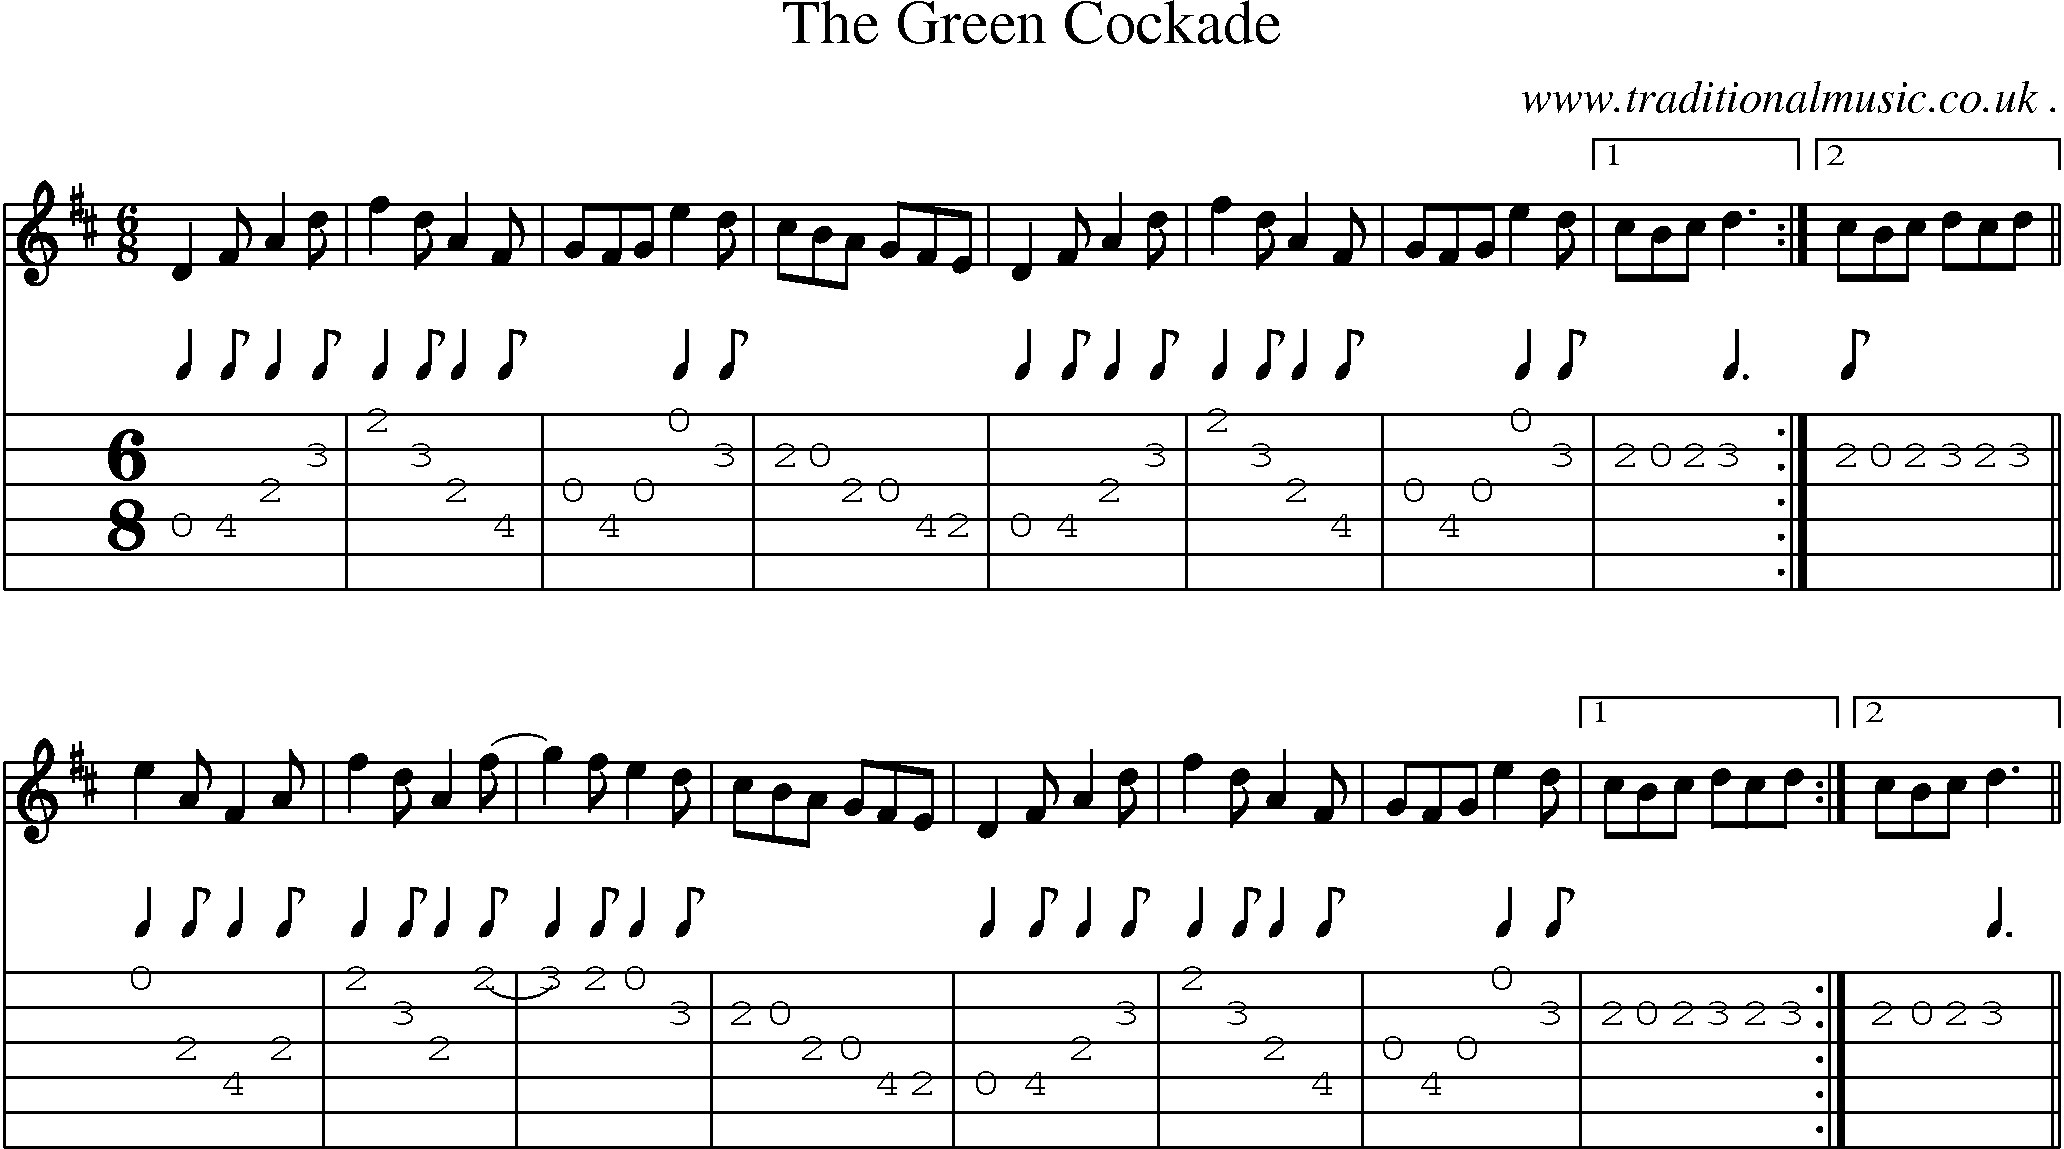 Sheet-Music and Guitar Tabs for The Green Cockade